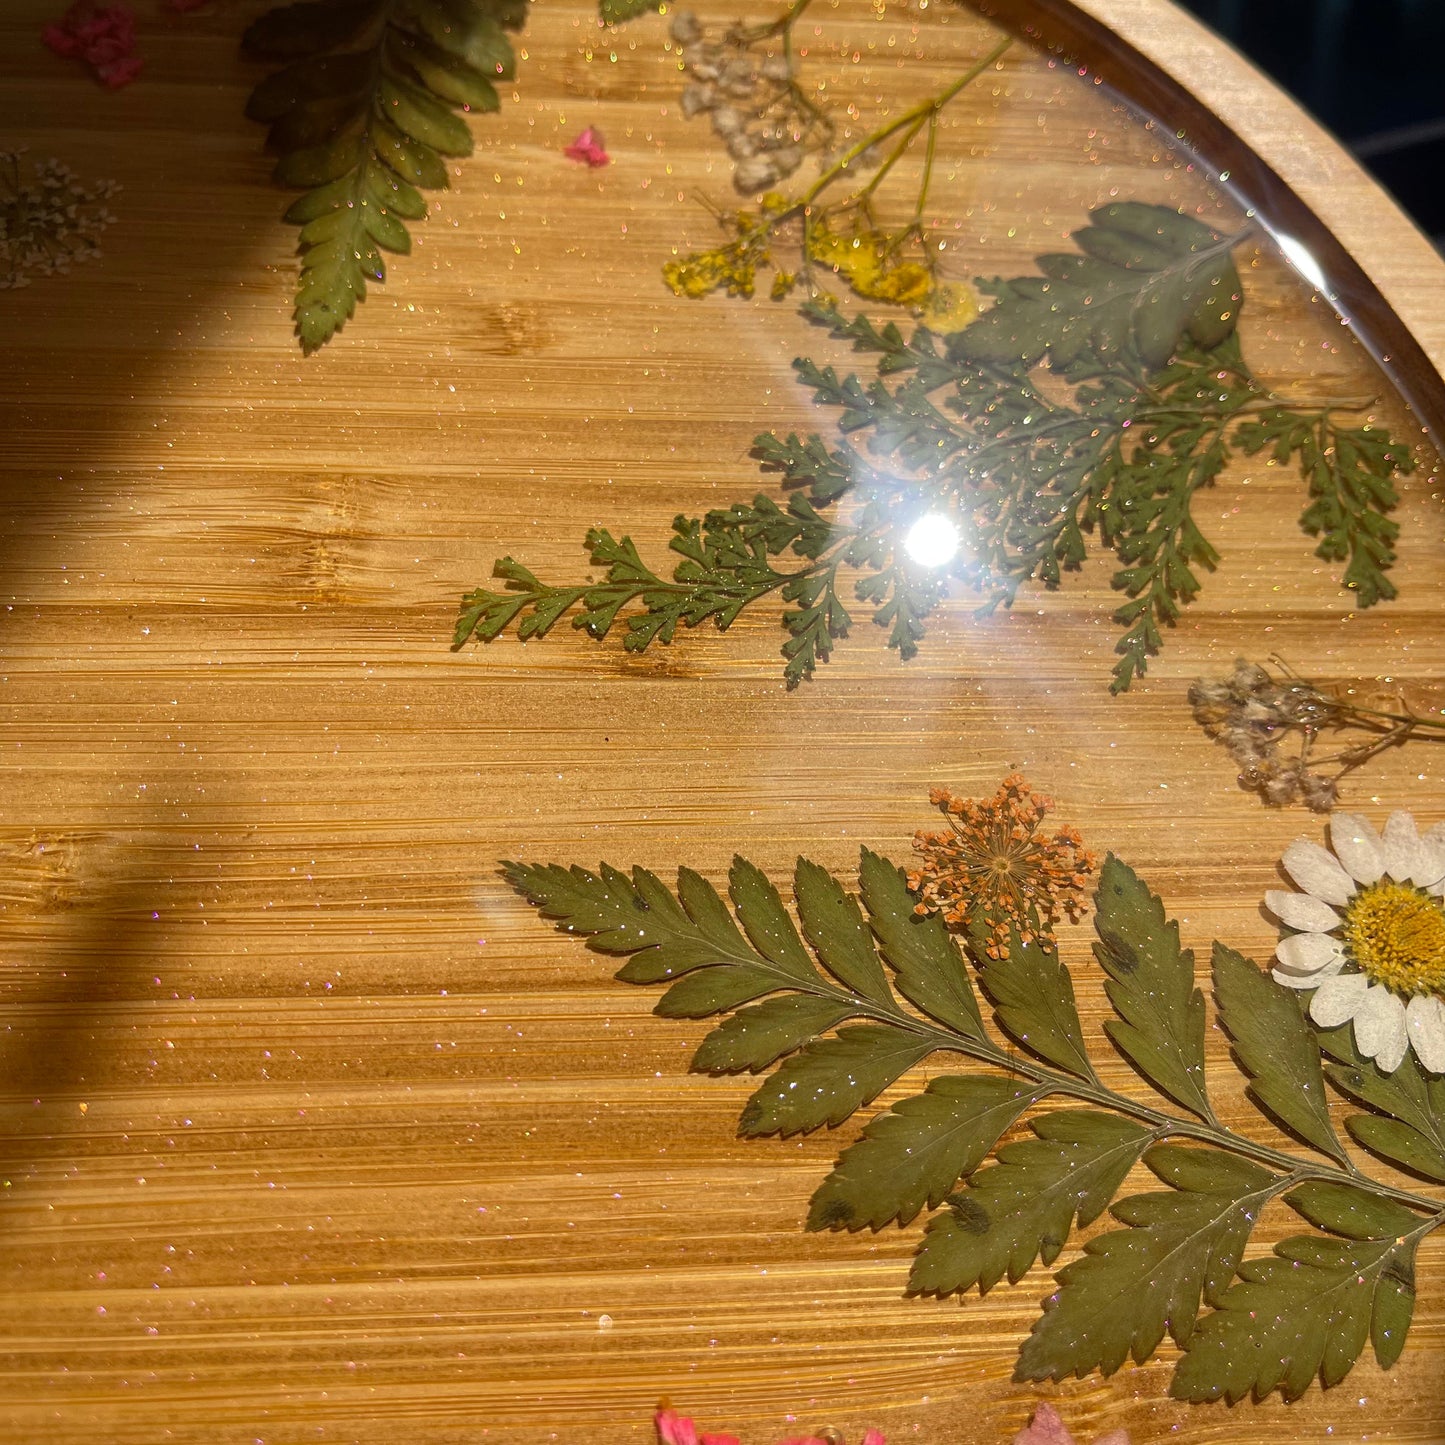 Resin Class - Flower Tray - 9/23 @ 1pm